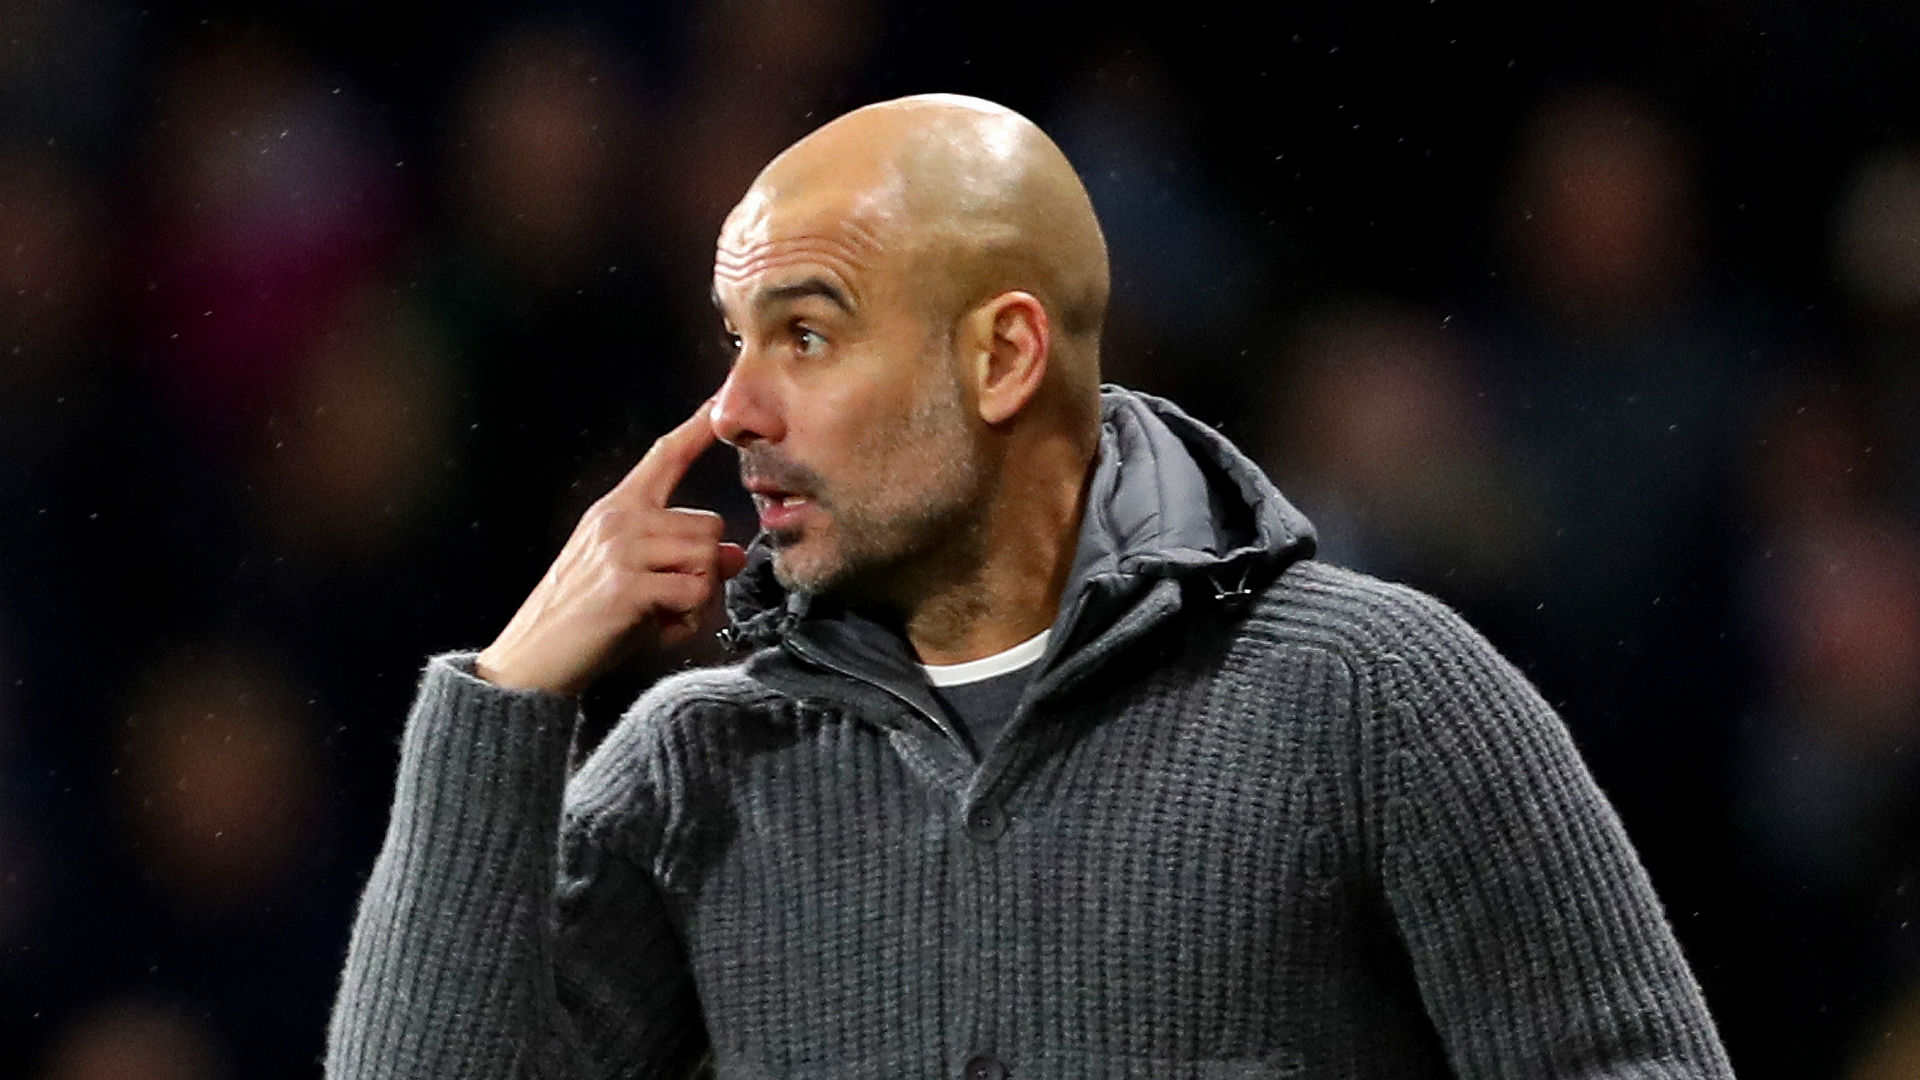 Maurizio Sarri's wholesome praise had not convinced Pep Guardiola his Manchester City side are the best on the continent.